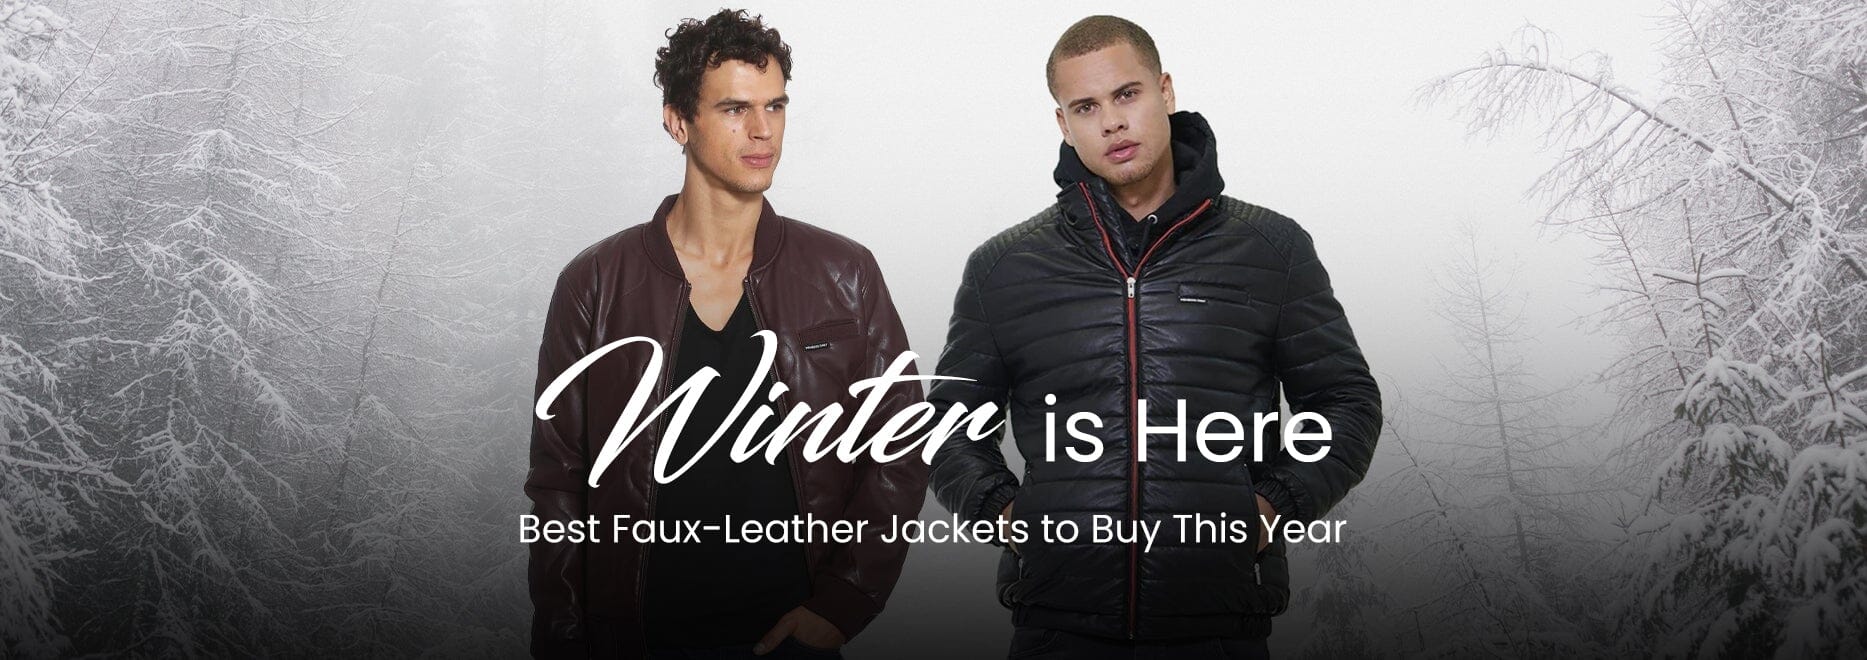 Winter Is Here: Best Faux-Leather Jackets to Buy This Year